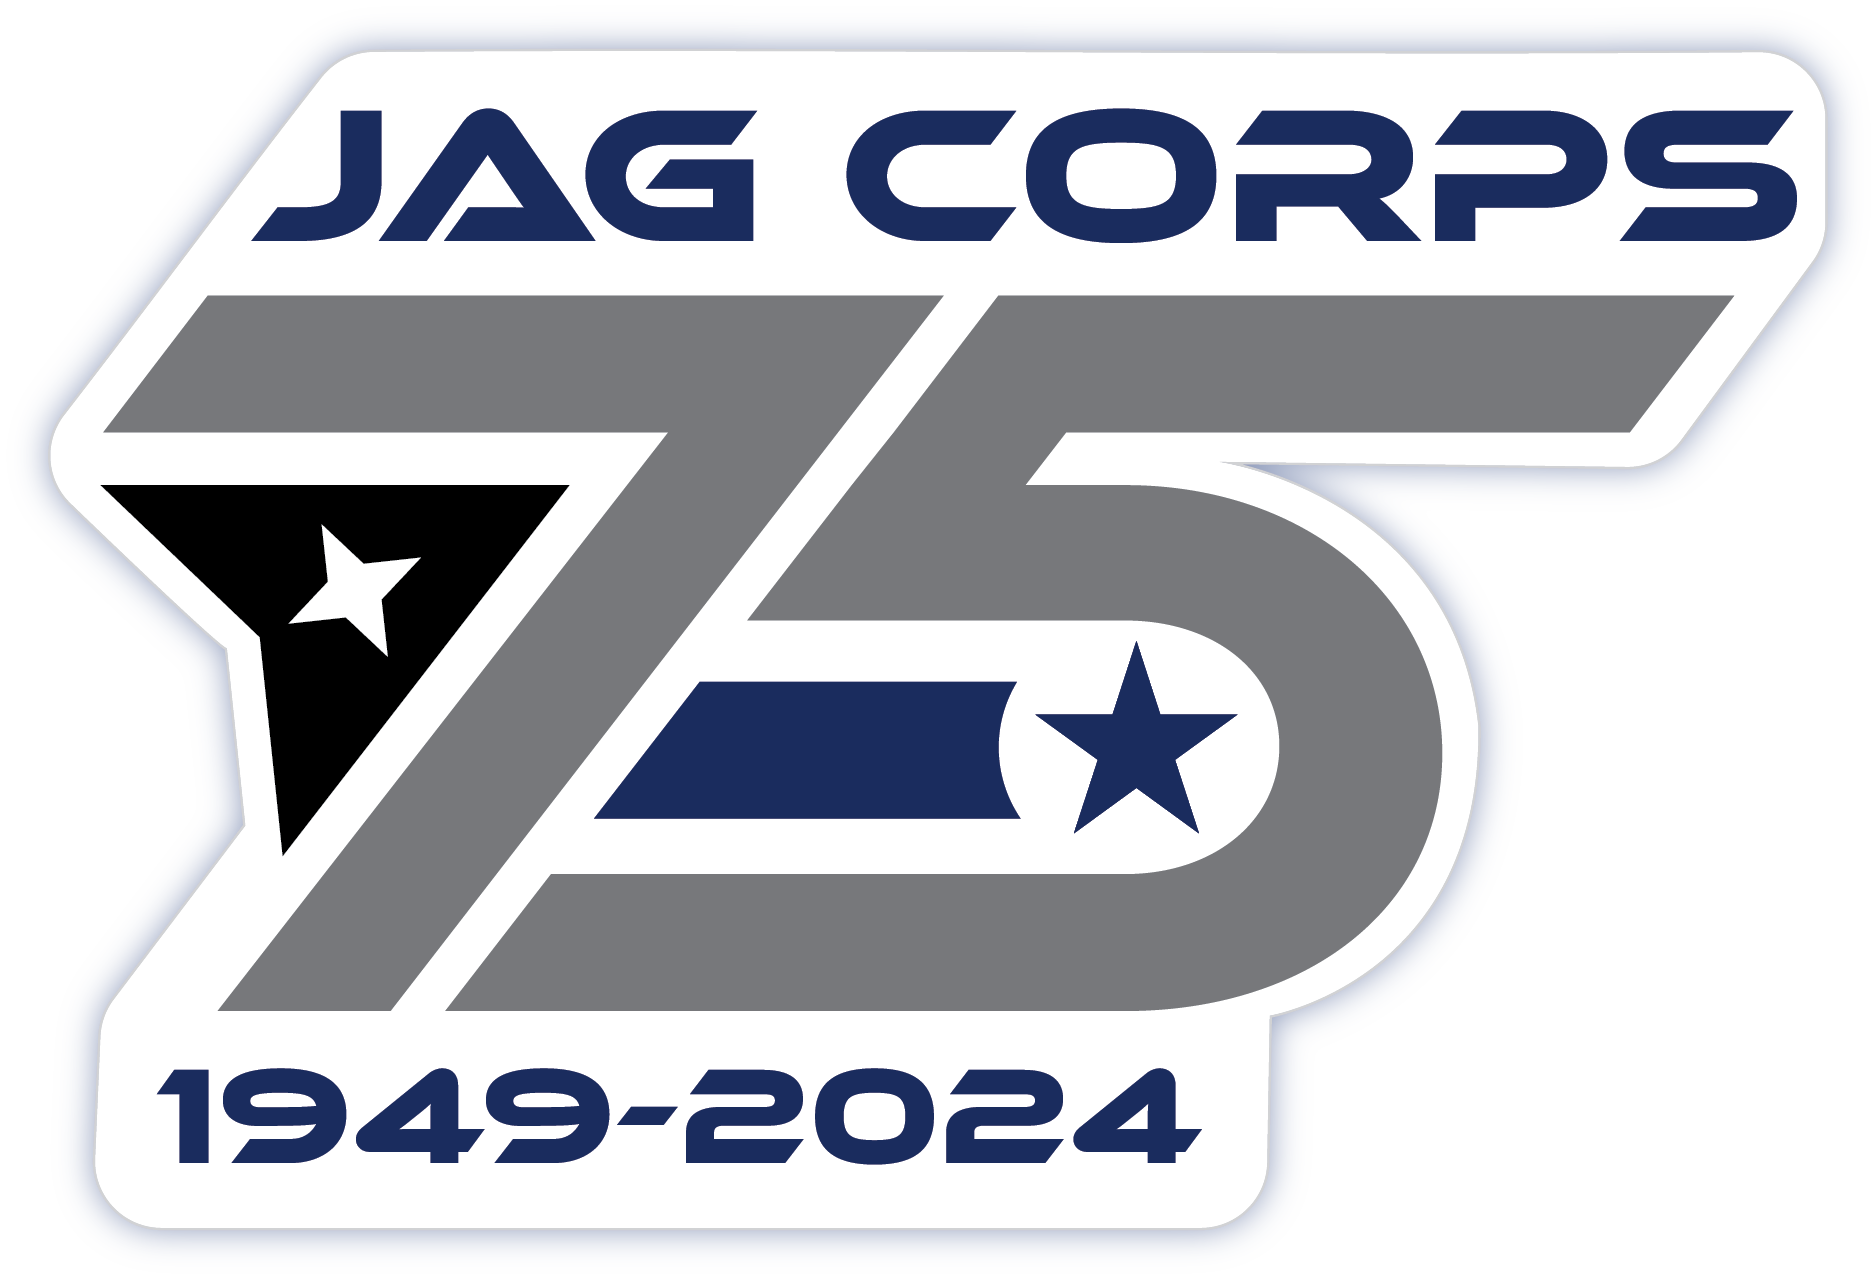 The Judge Advocate General's Corp's 75th Anniversary seal